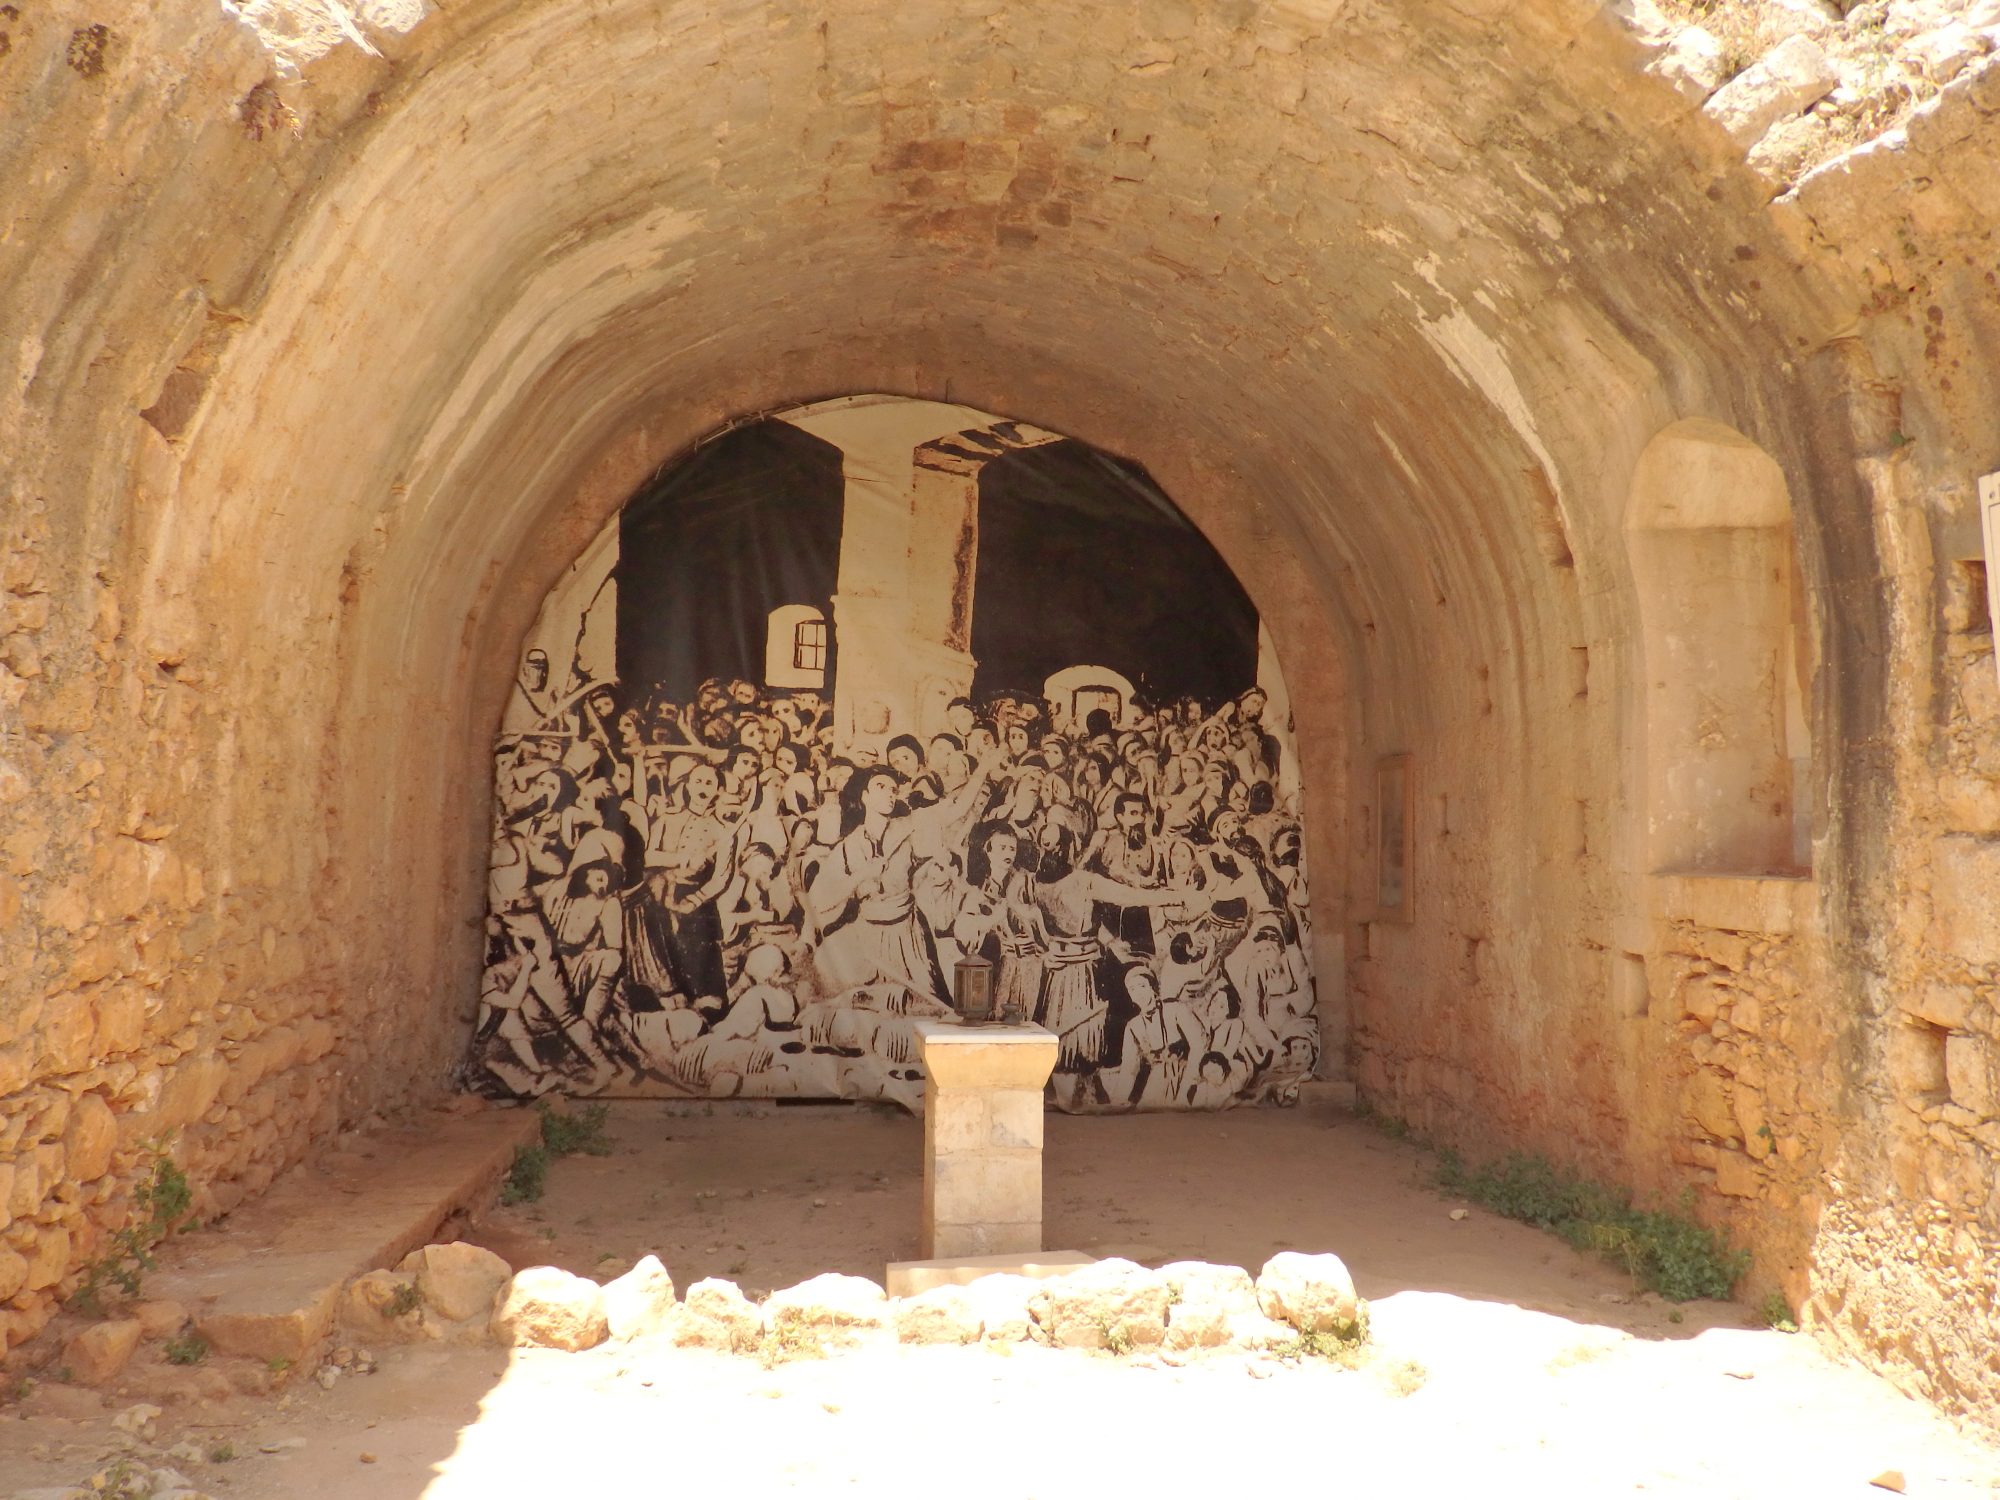 The intact end of the powder room at Arkadi is painted as a reminder of the tragedy that happened there.